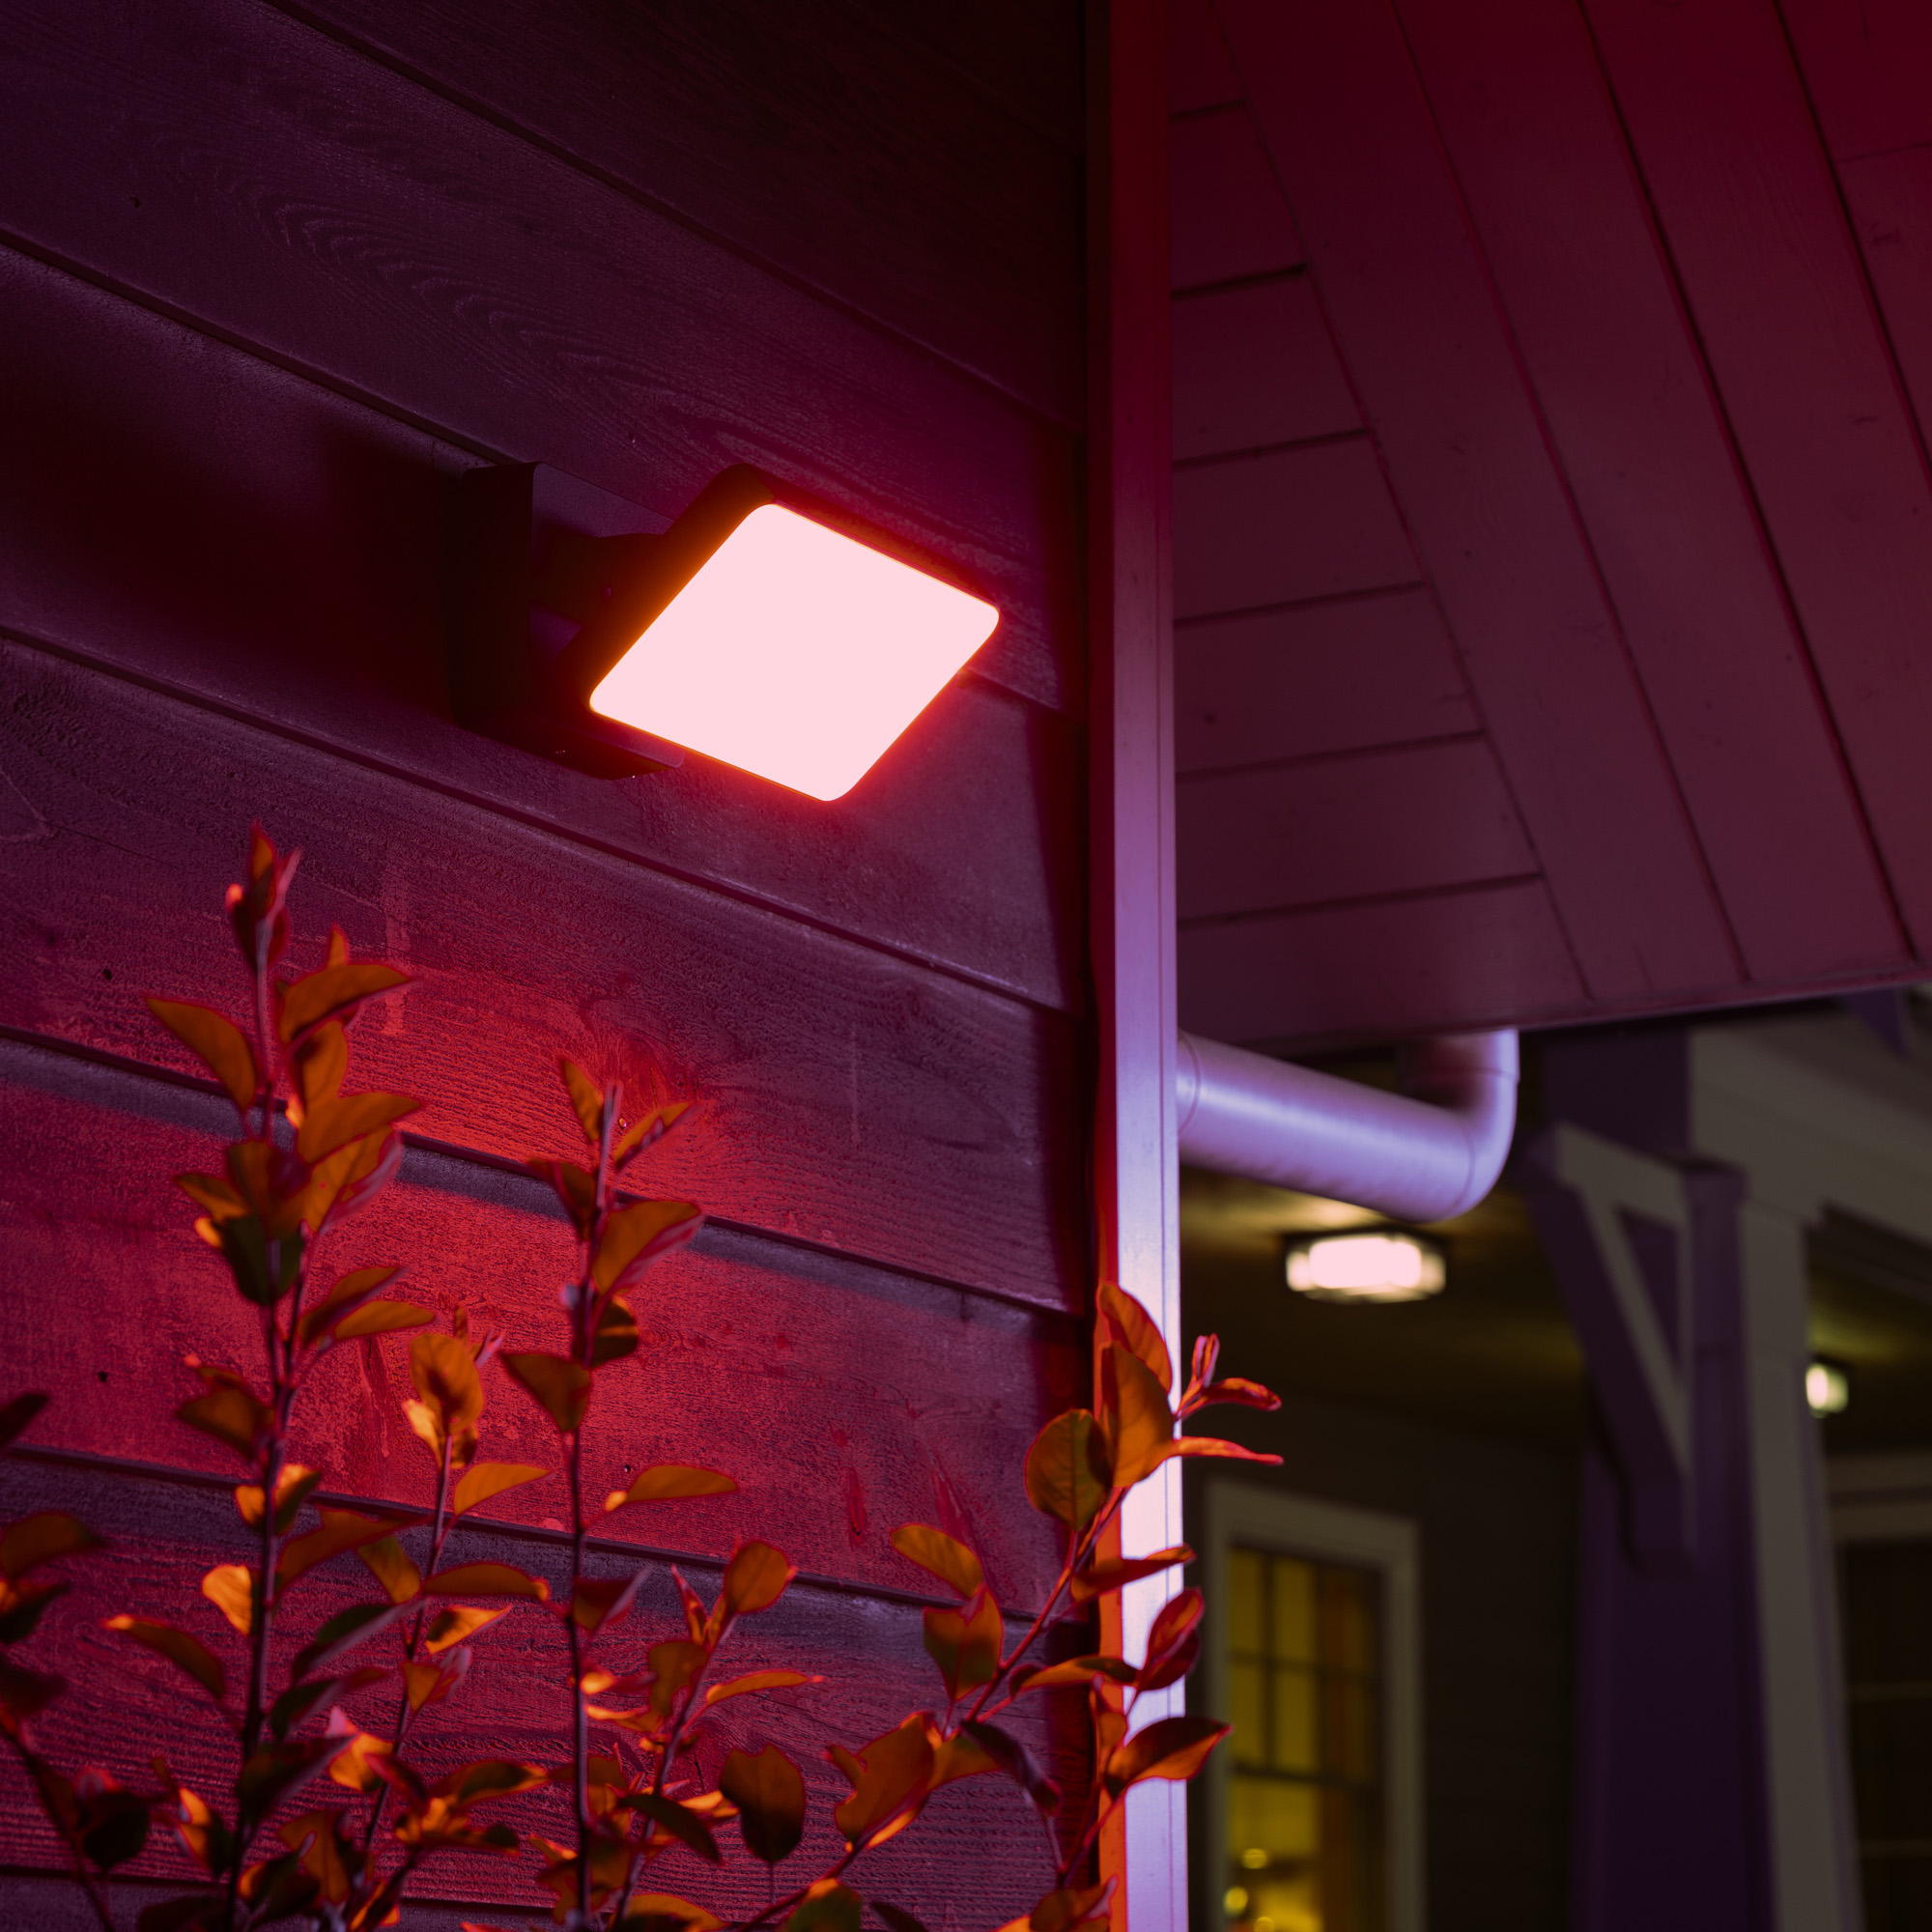 Philips Hue White and Color Ambiance Discover LED Floodlight black